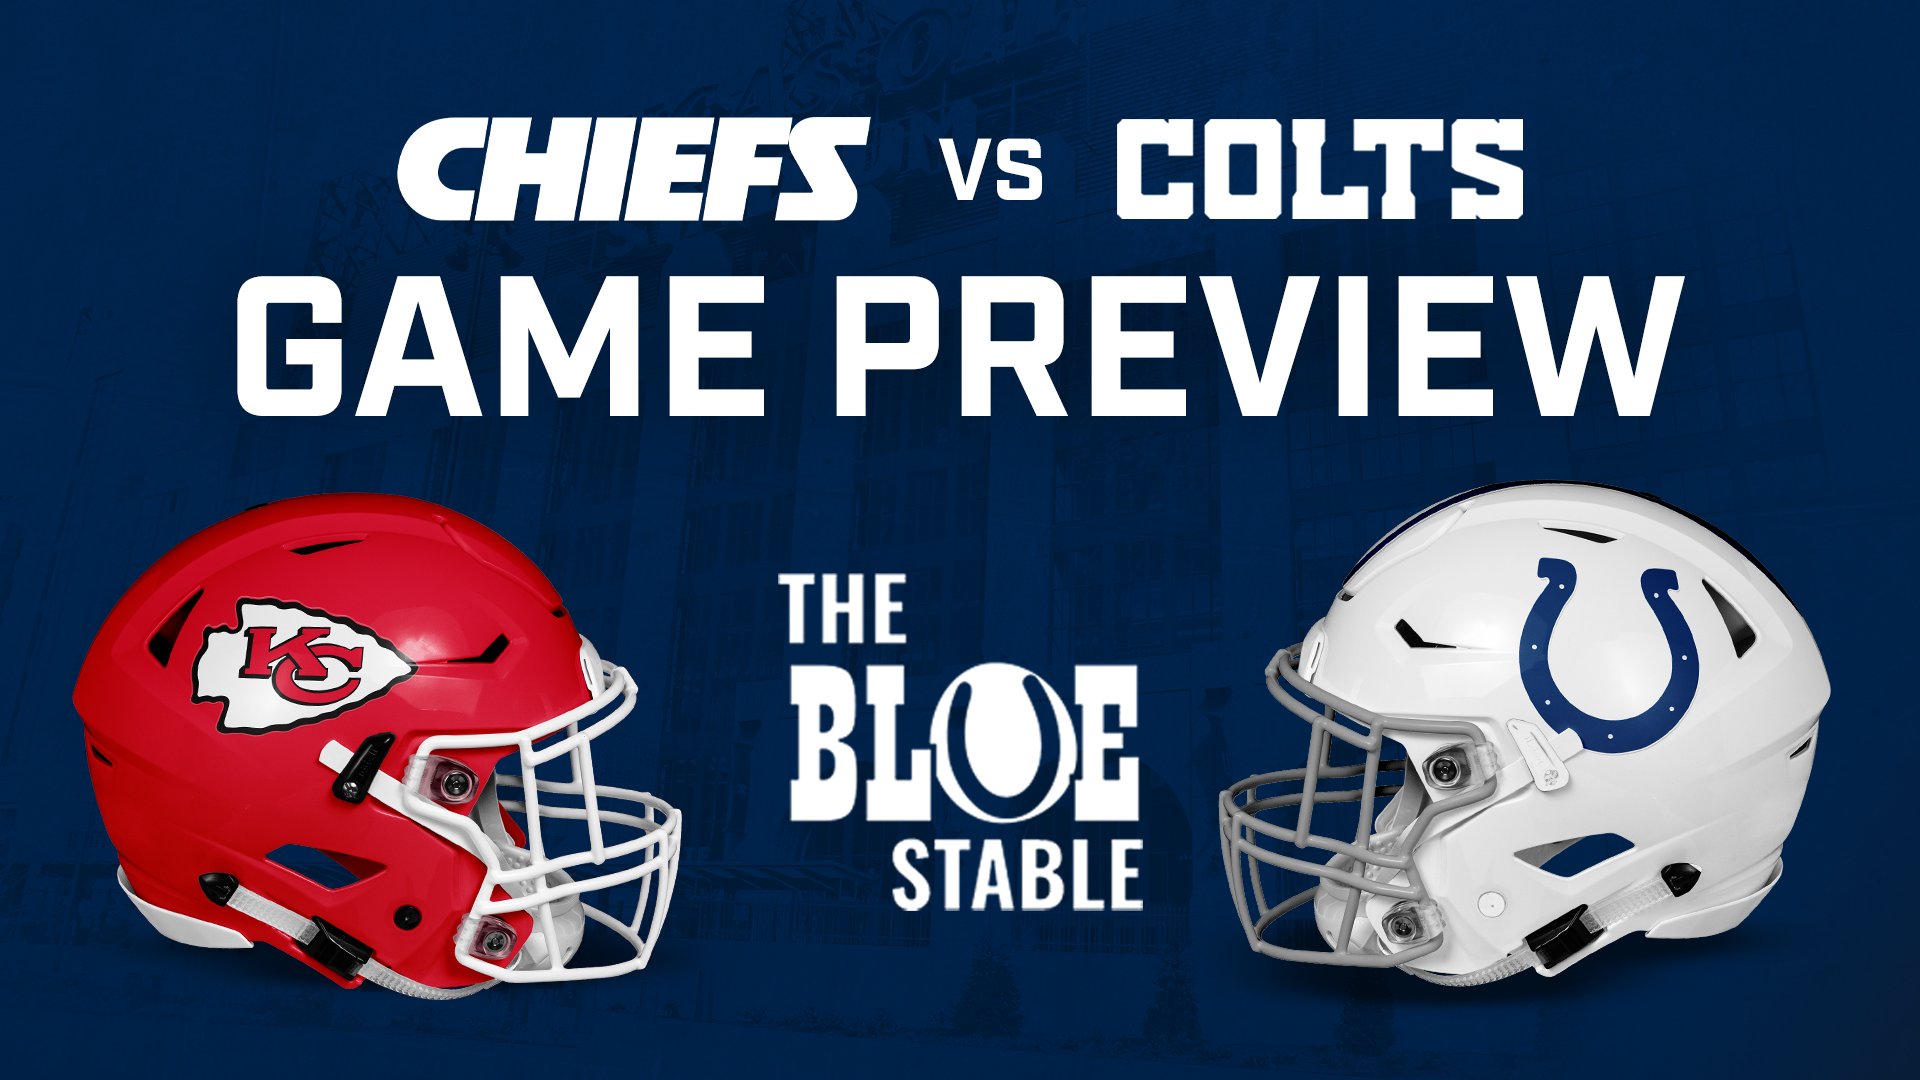 Colts vs Chiefs Game Preview